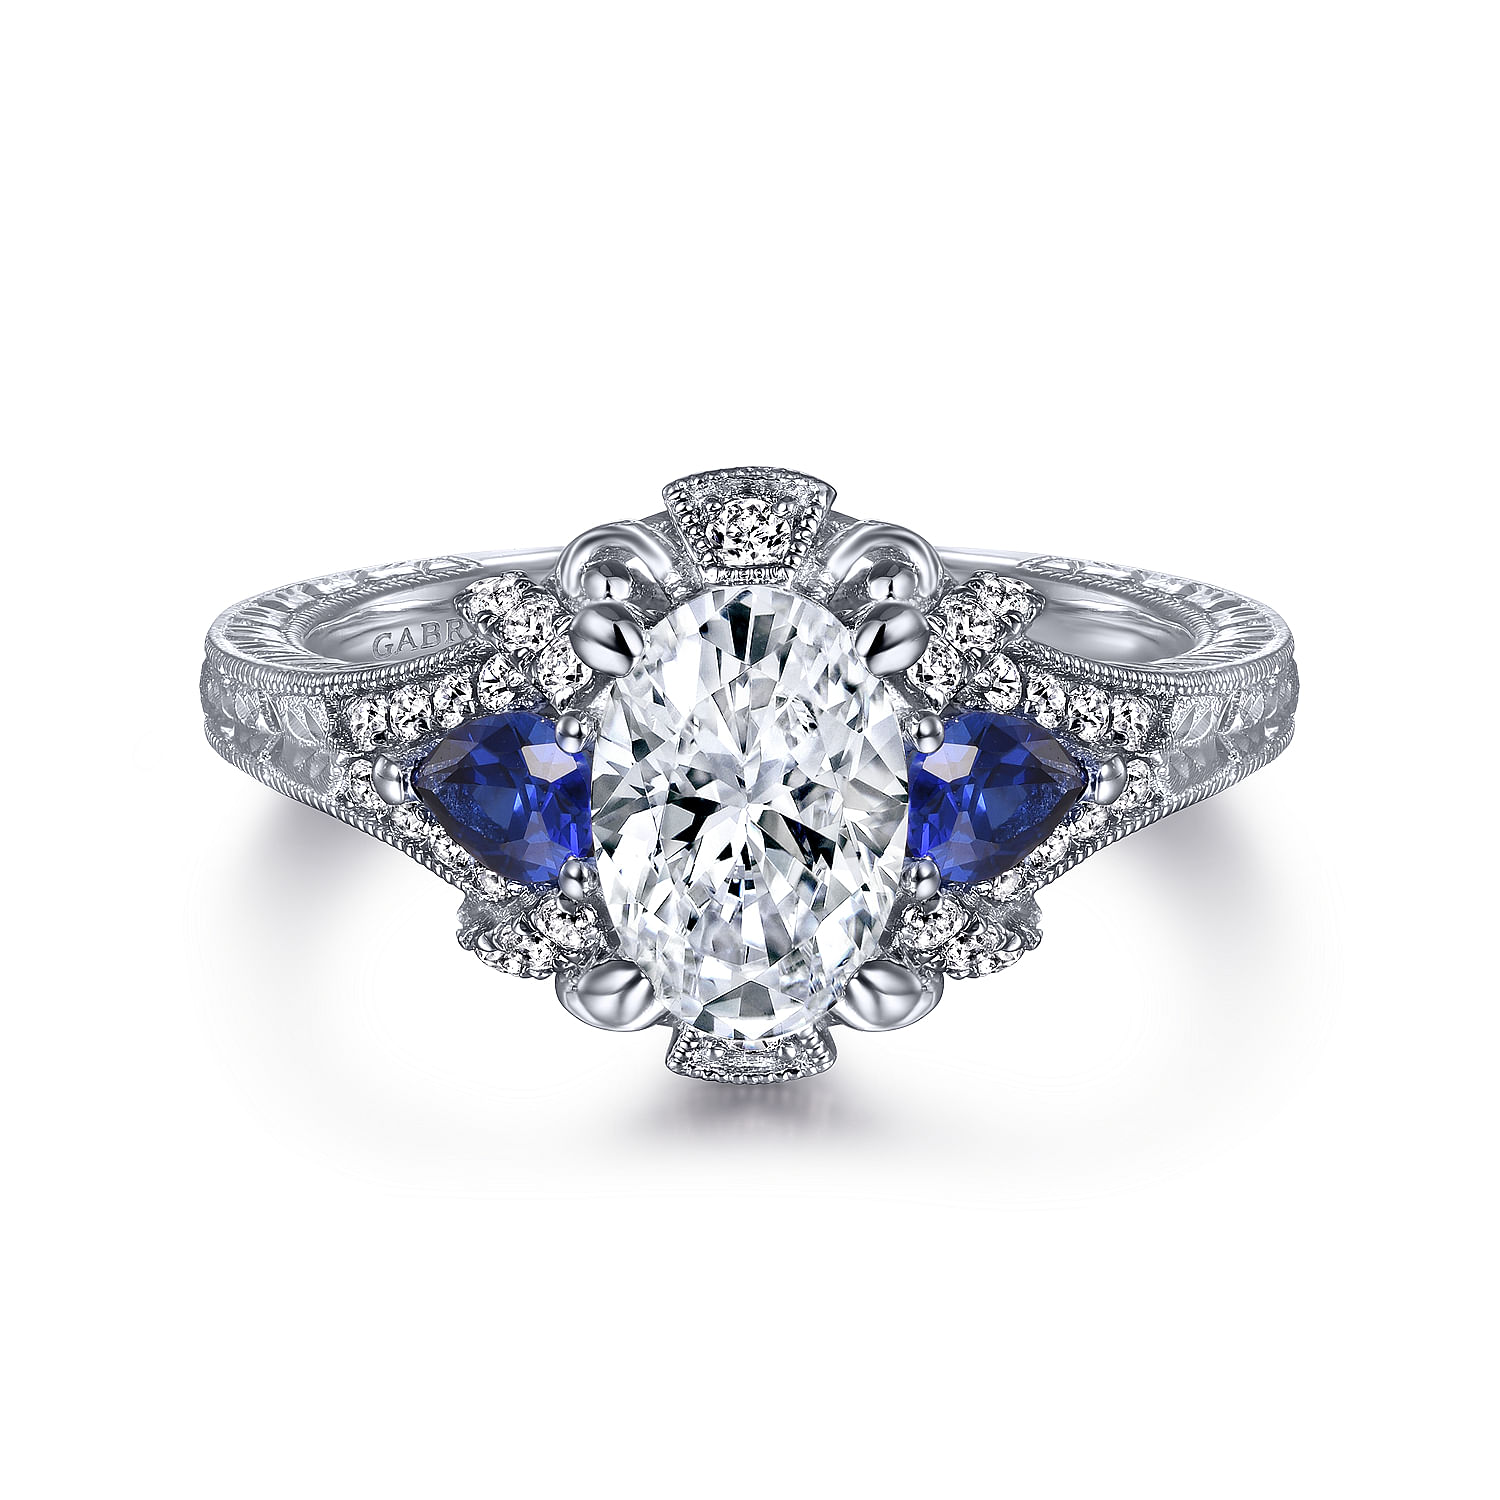 Chrystie - 14K White Gold Oval Sapphire and Diamond Engagement Ring